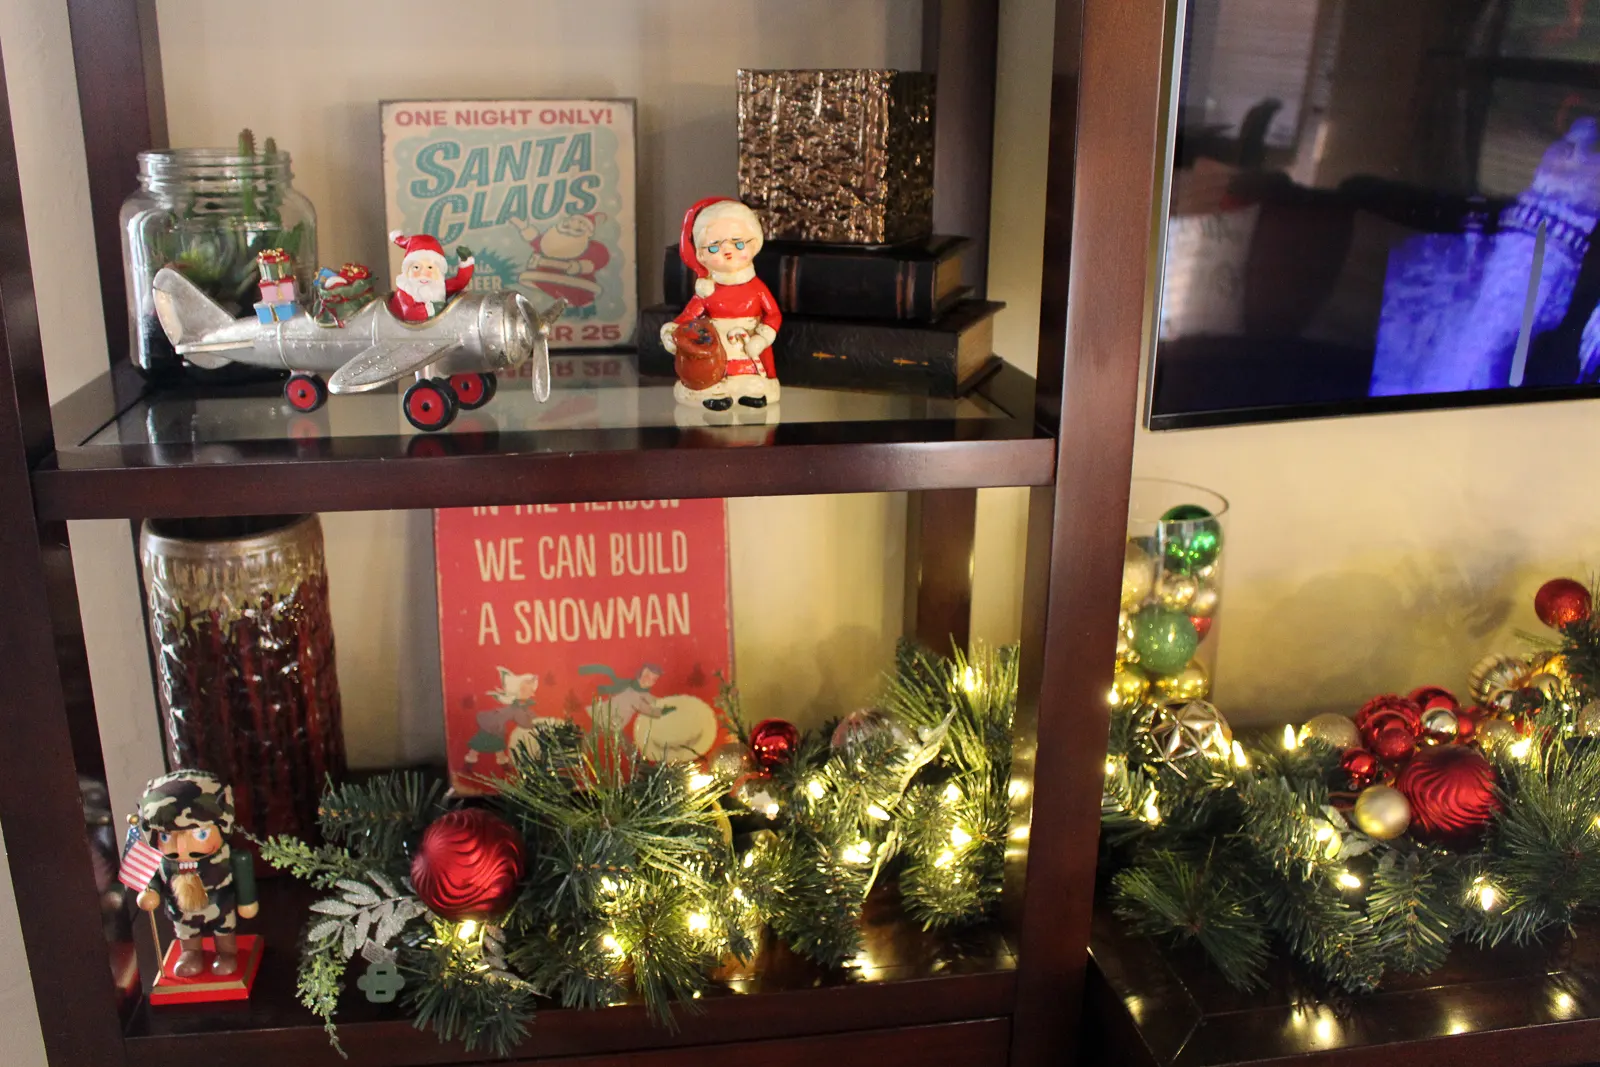 Holiday decorations on an entertainment center, including vintage Santa figurines and an illuminated garland